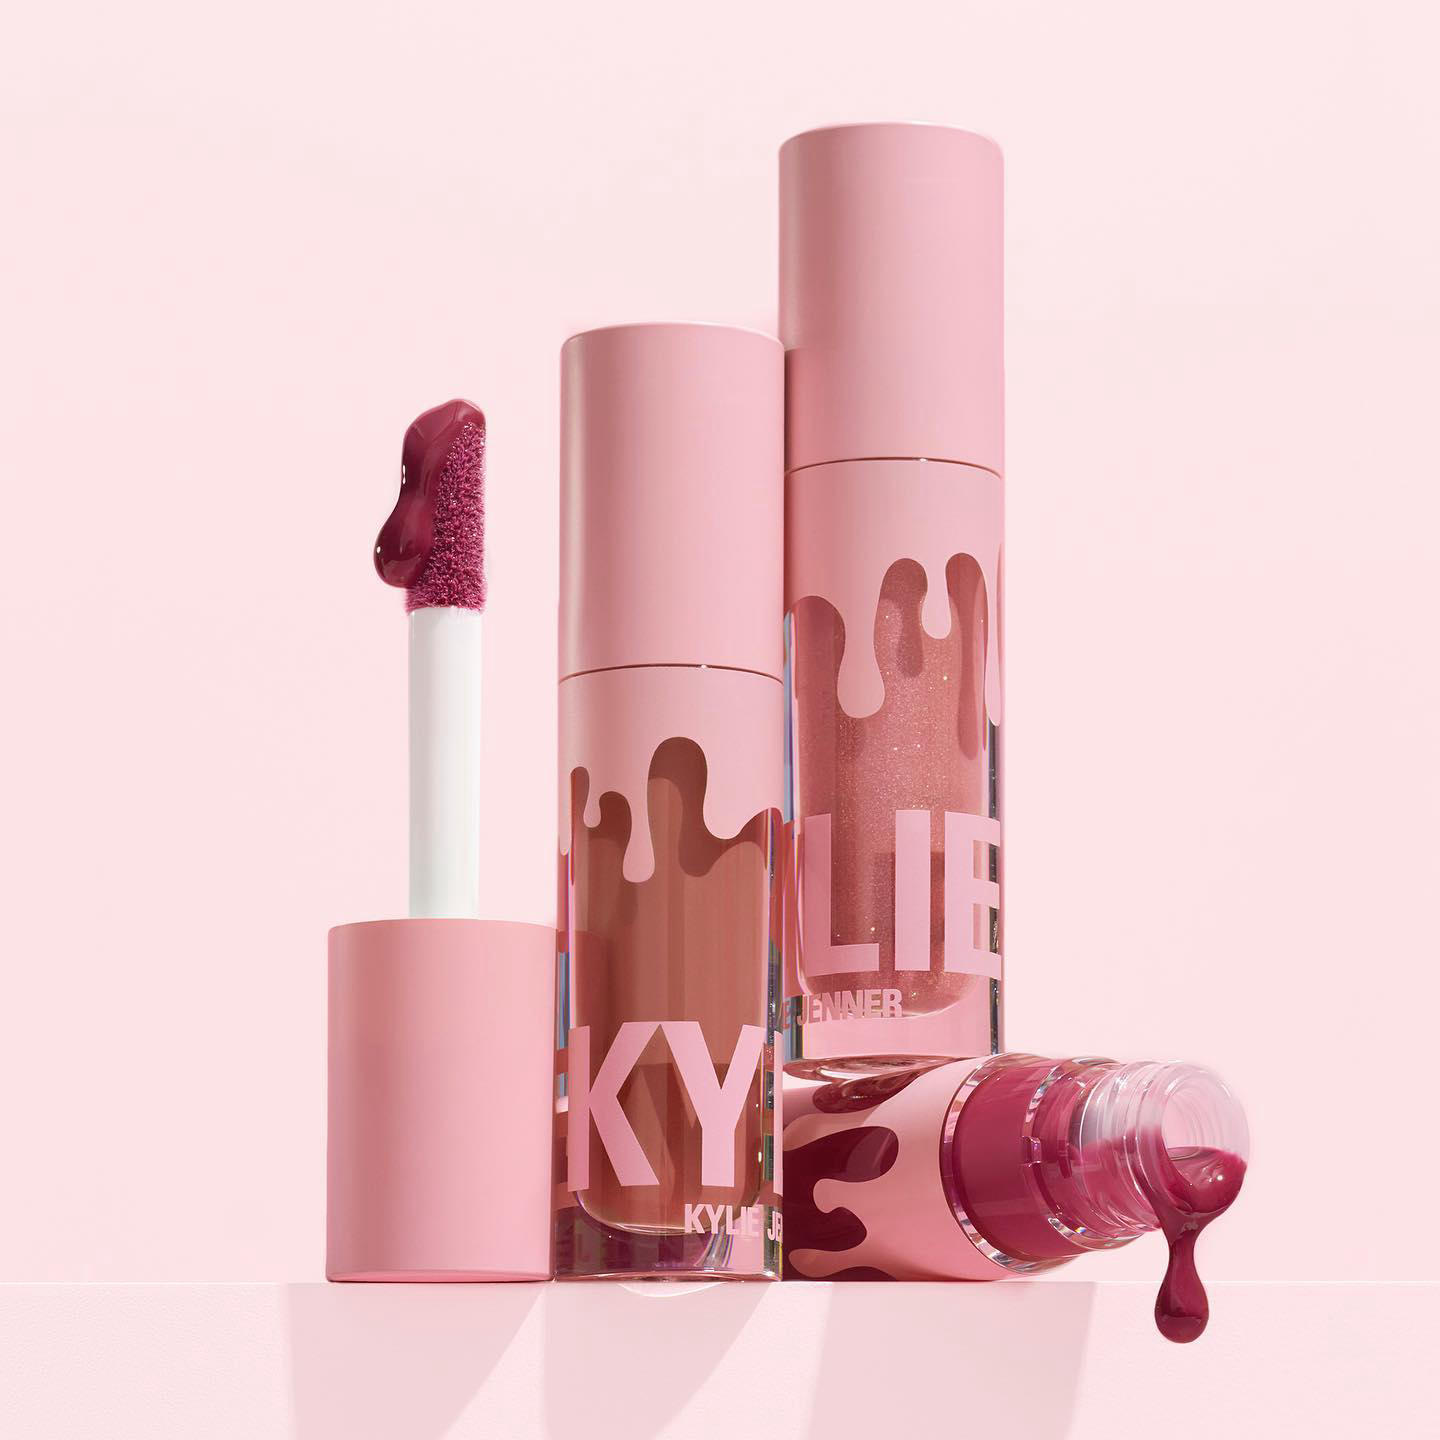 Kylie Cosmetics - Kylie's Holiday Gift Sets are here and now available on KylieCosmetics